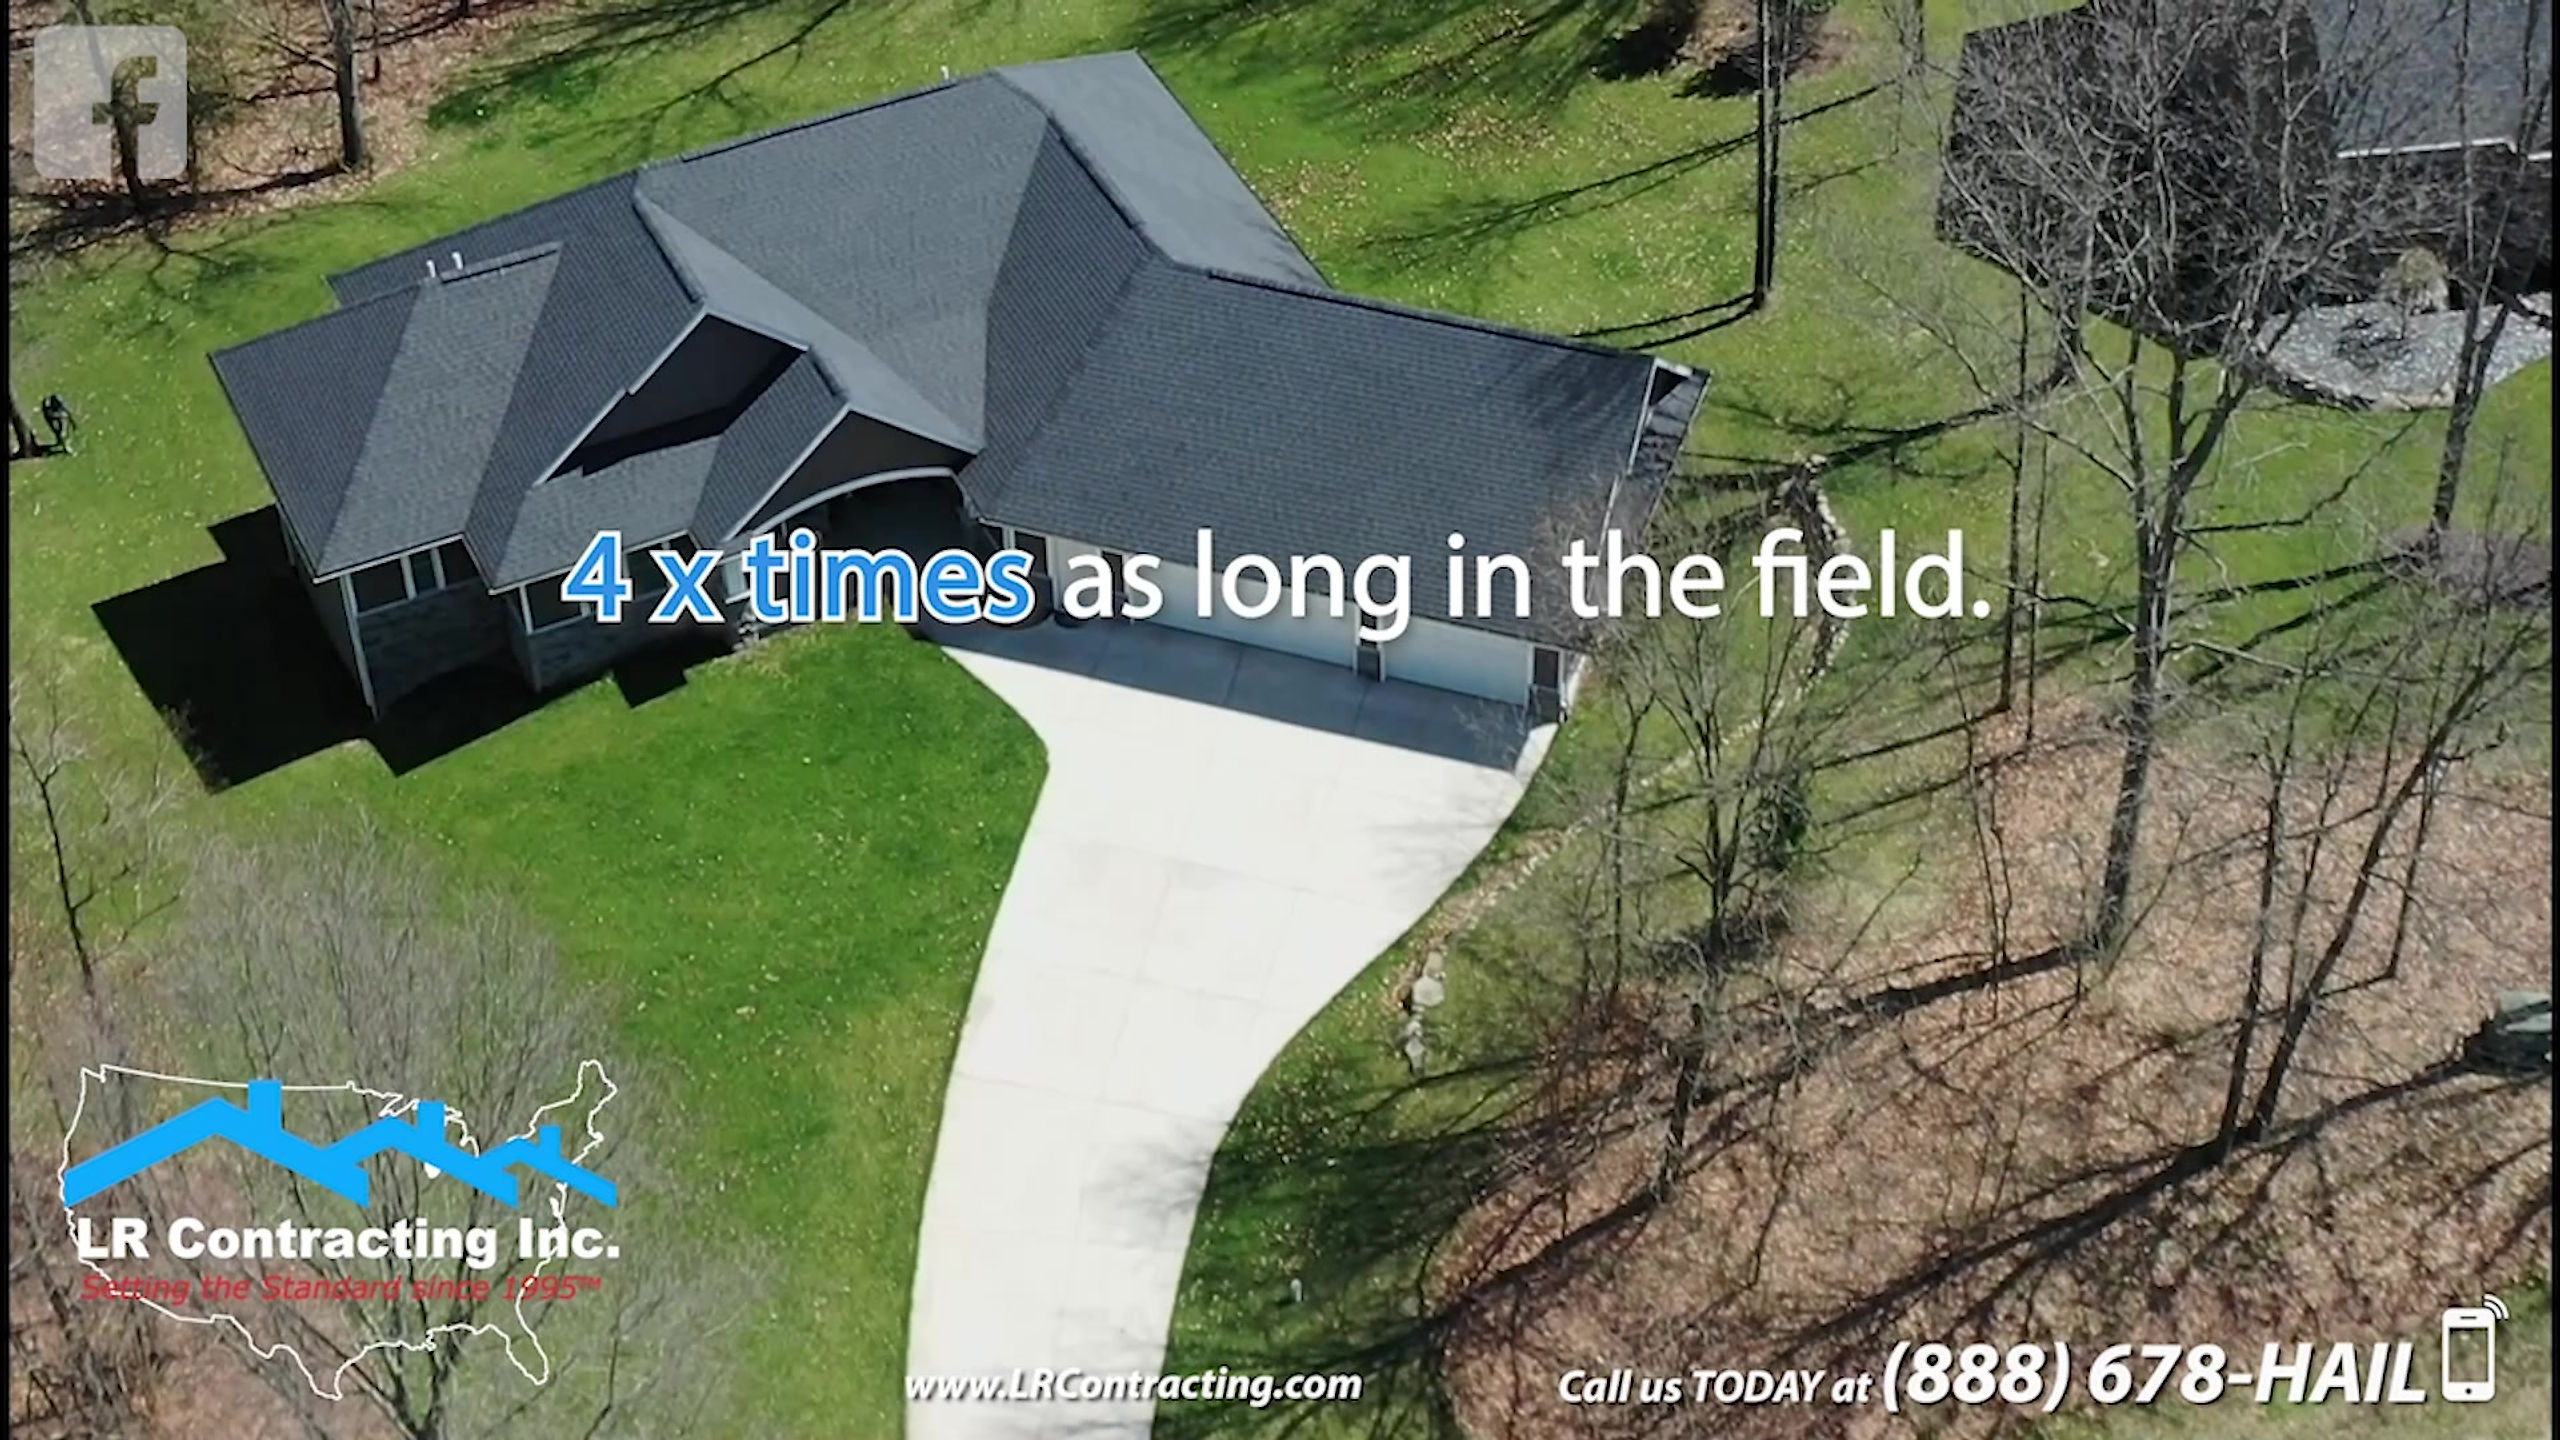 Why LR Contracting Inc. in NOW Using Drones on Roofing Sites & Commercial Projects